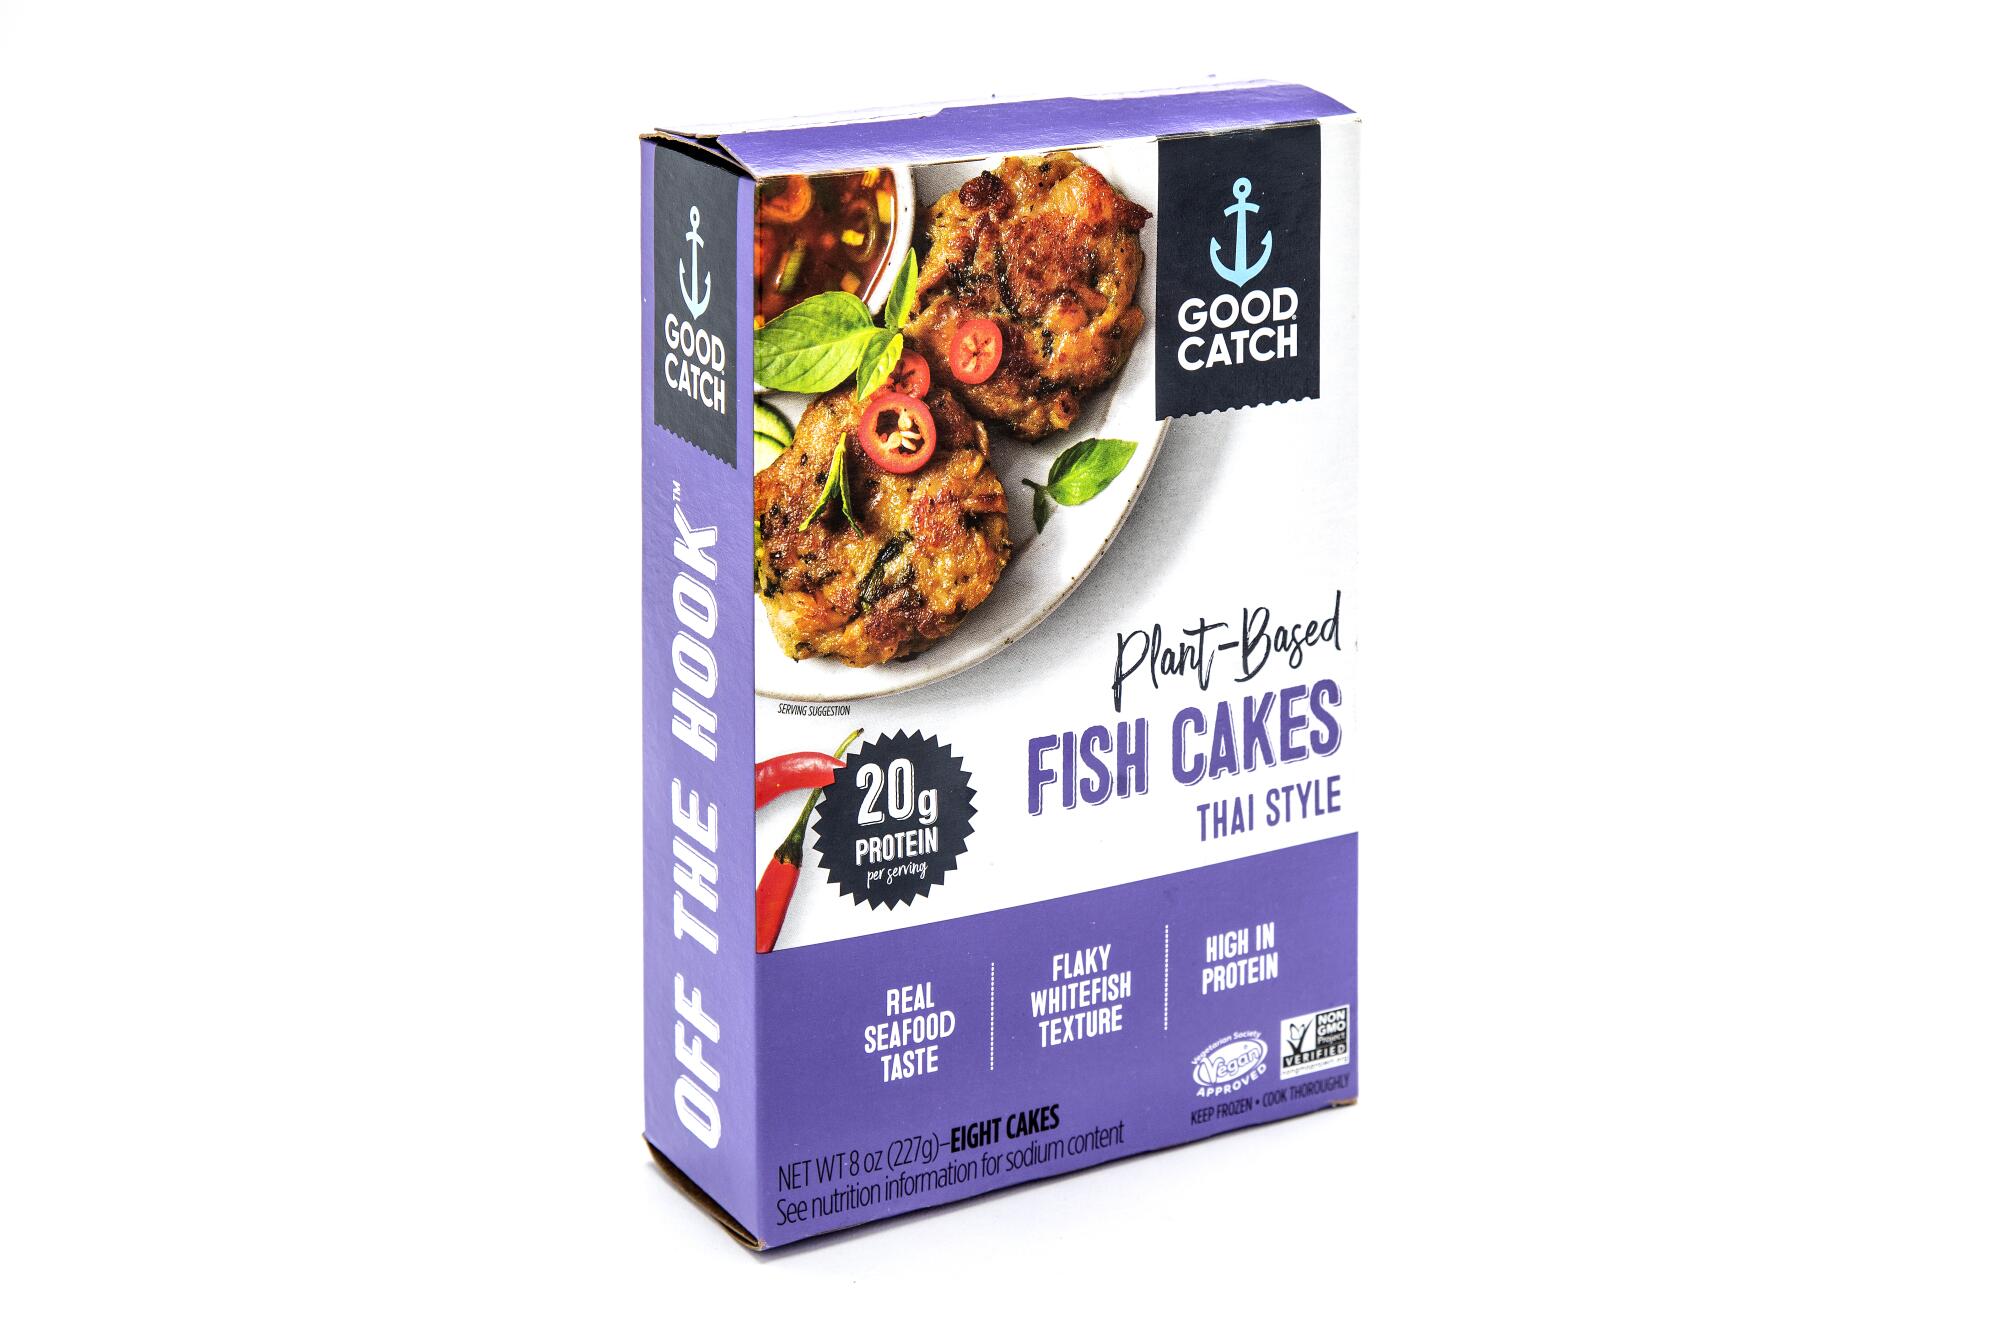 A box of Good Catch plant-based Thai style fish cakes 